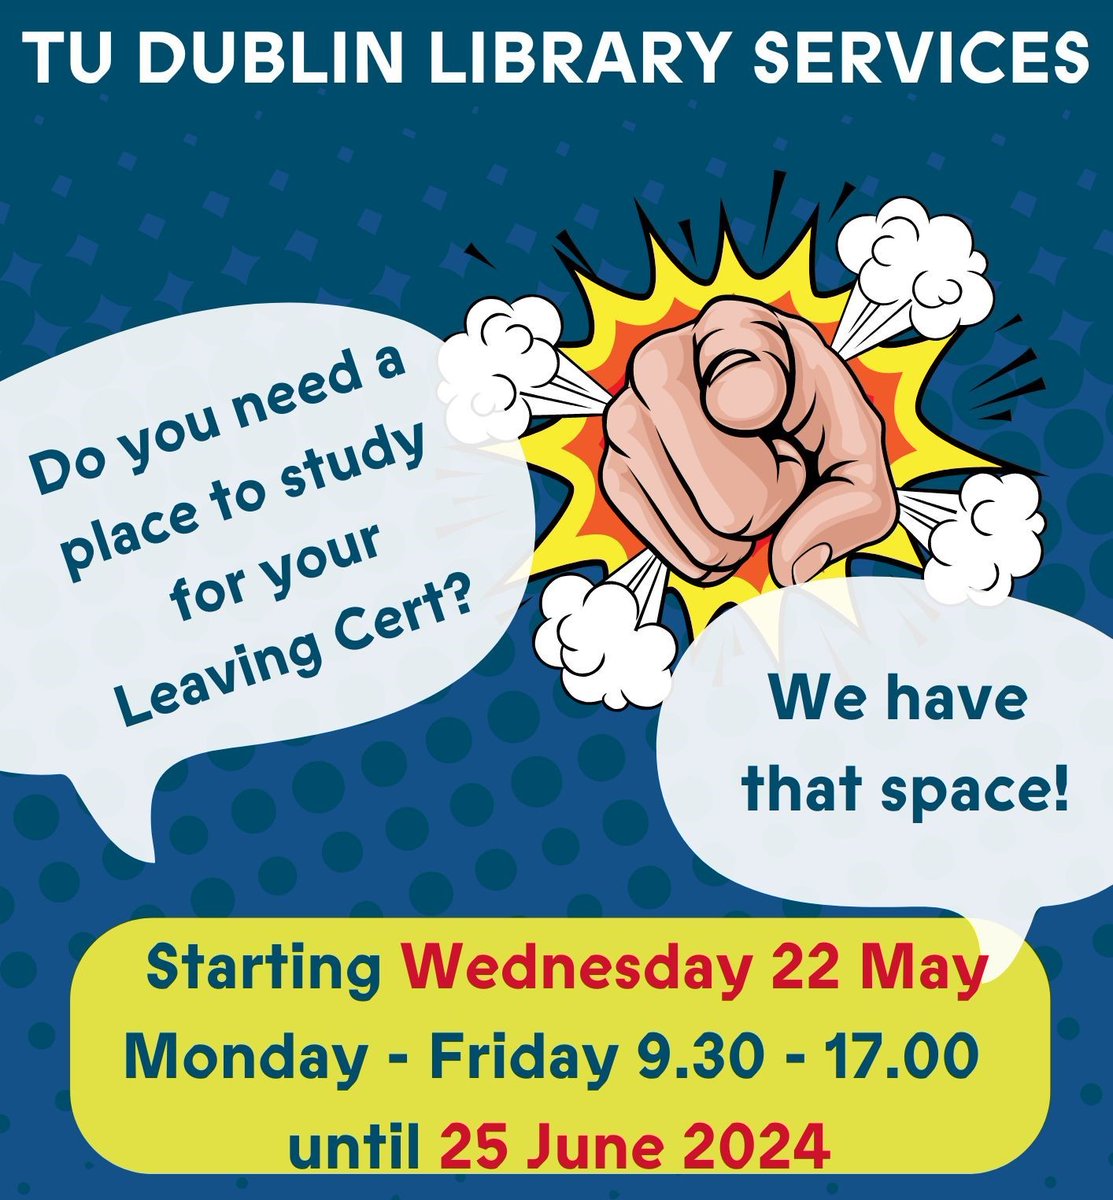 Leaving Certificate Study Programme, 2024👇;

Wednesday 22nd May to Tuesday 25th June, Leaving Certificate Students may use our libraries as study spaces in;
 
Grangegorman (Park House), Aungier Street, Bolton Street, Blanchardstown, and Tallaght

tudublin.ie/library/using-…